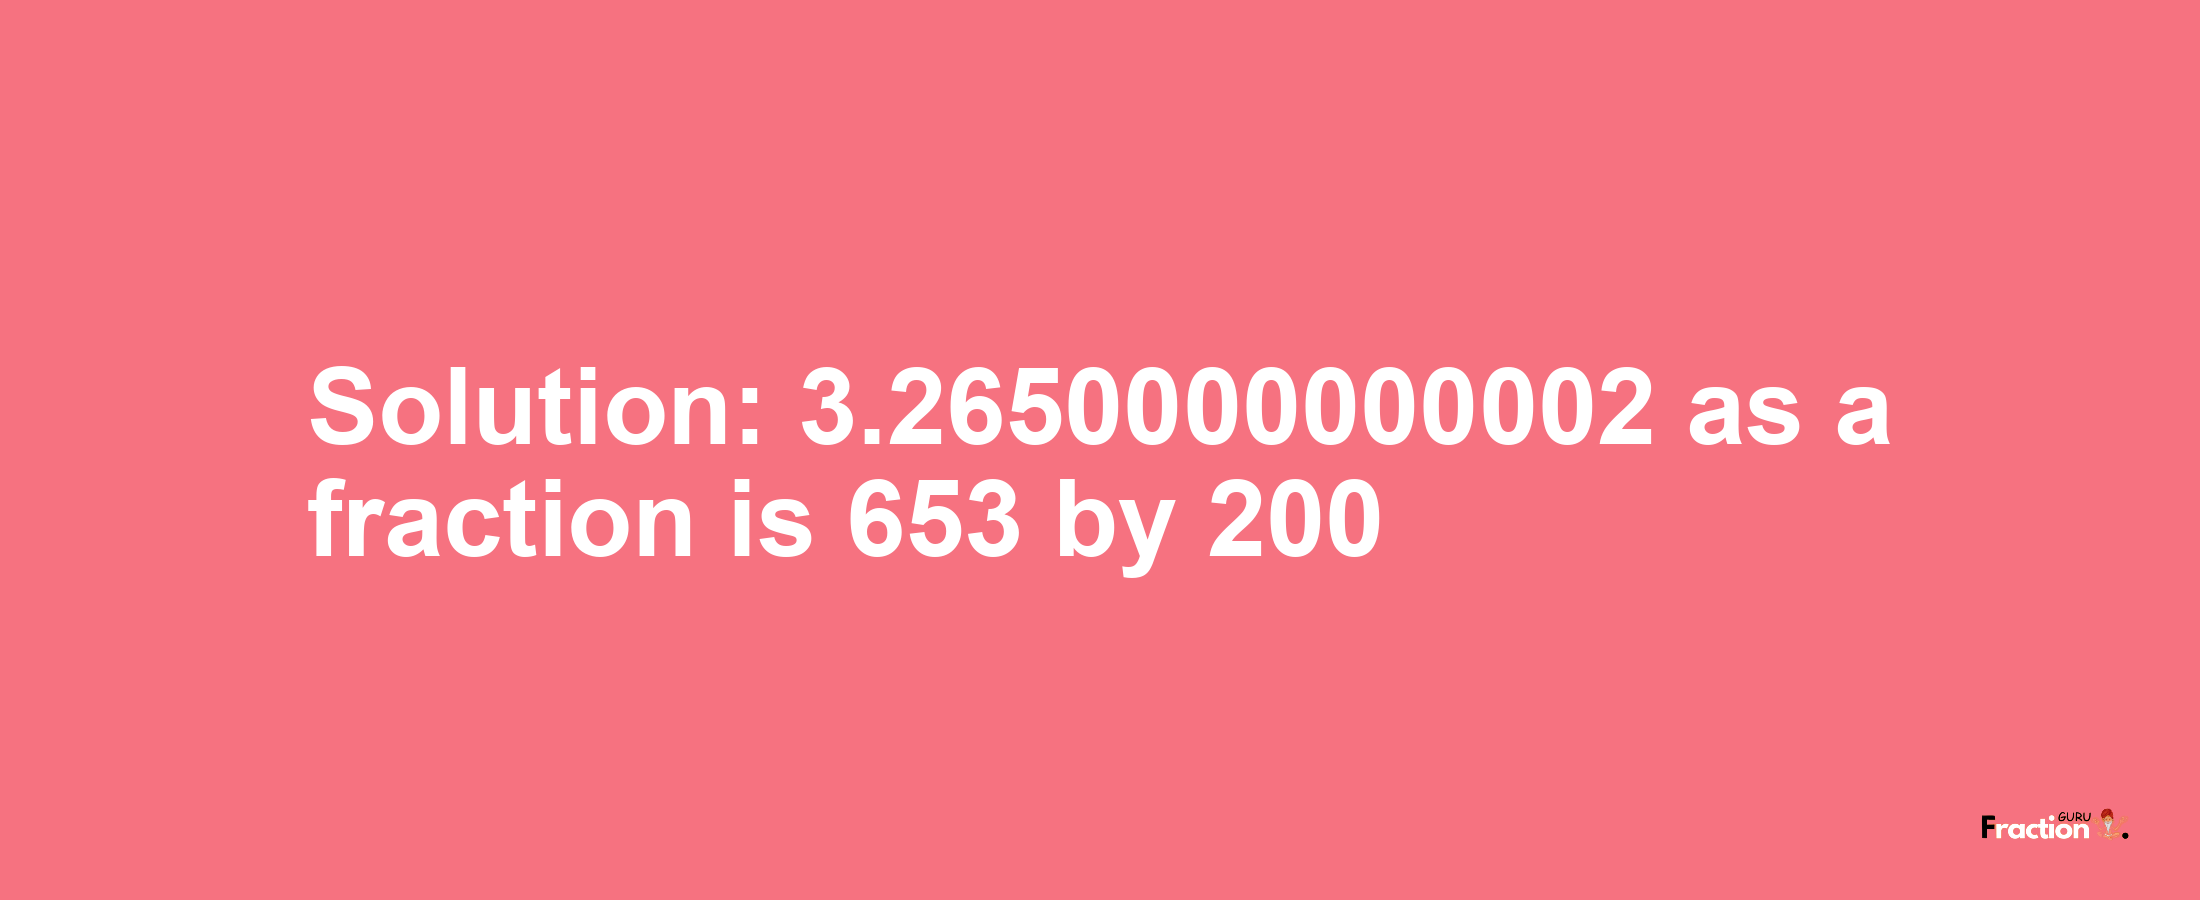 Solution:3.2650000000002 as a fraction is 653/200